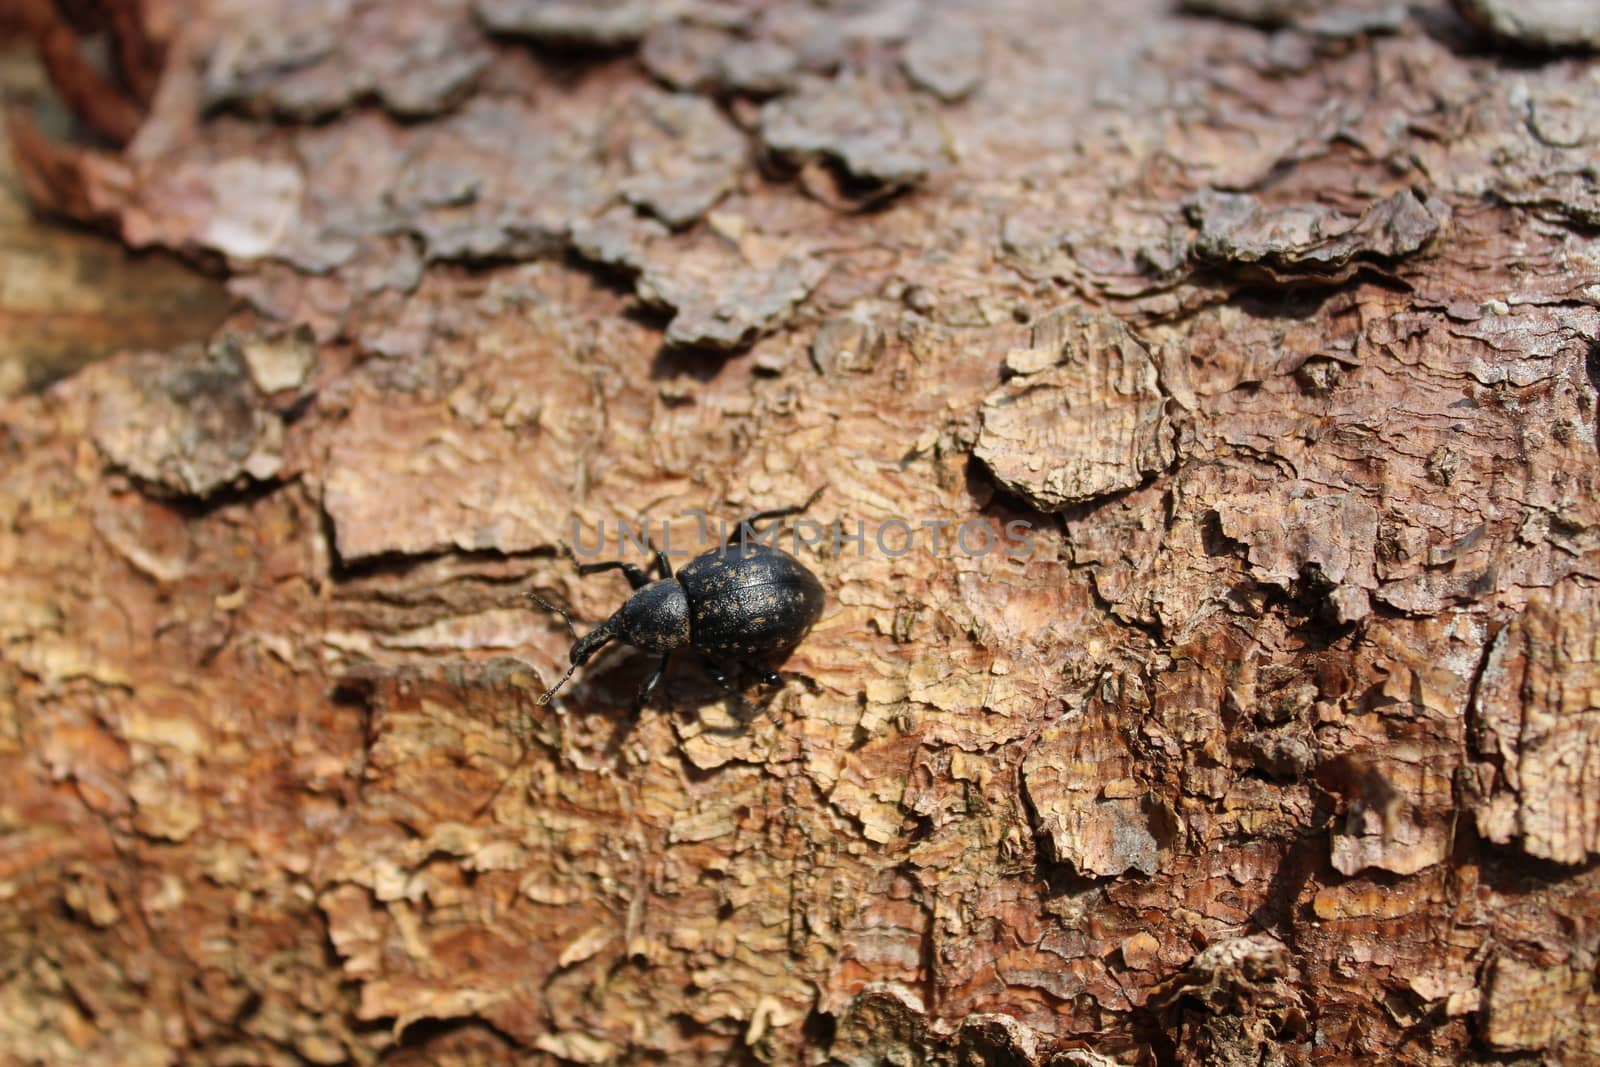 weevil on a bark in the forest by martina_unbehauen